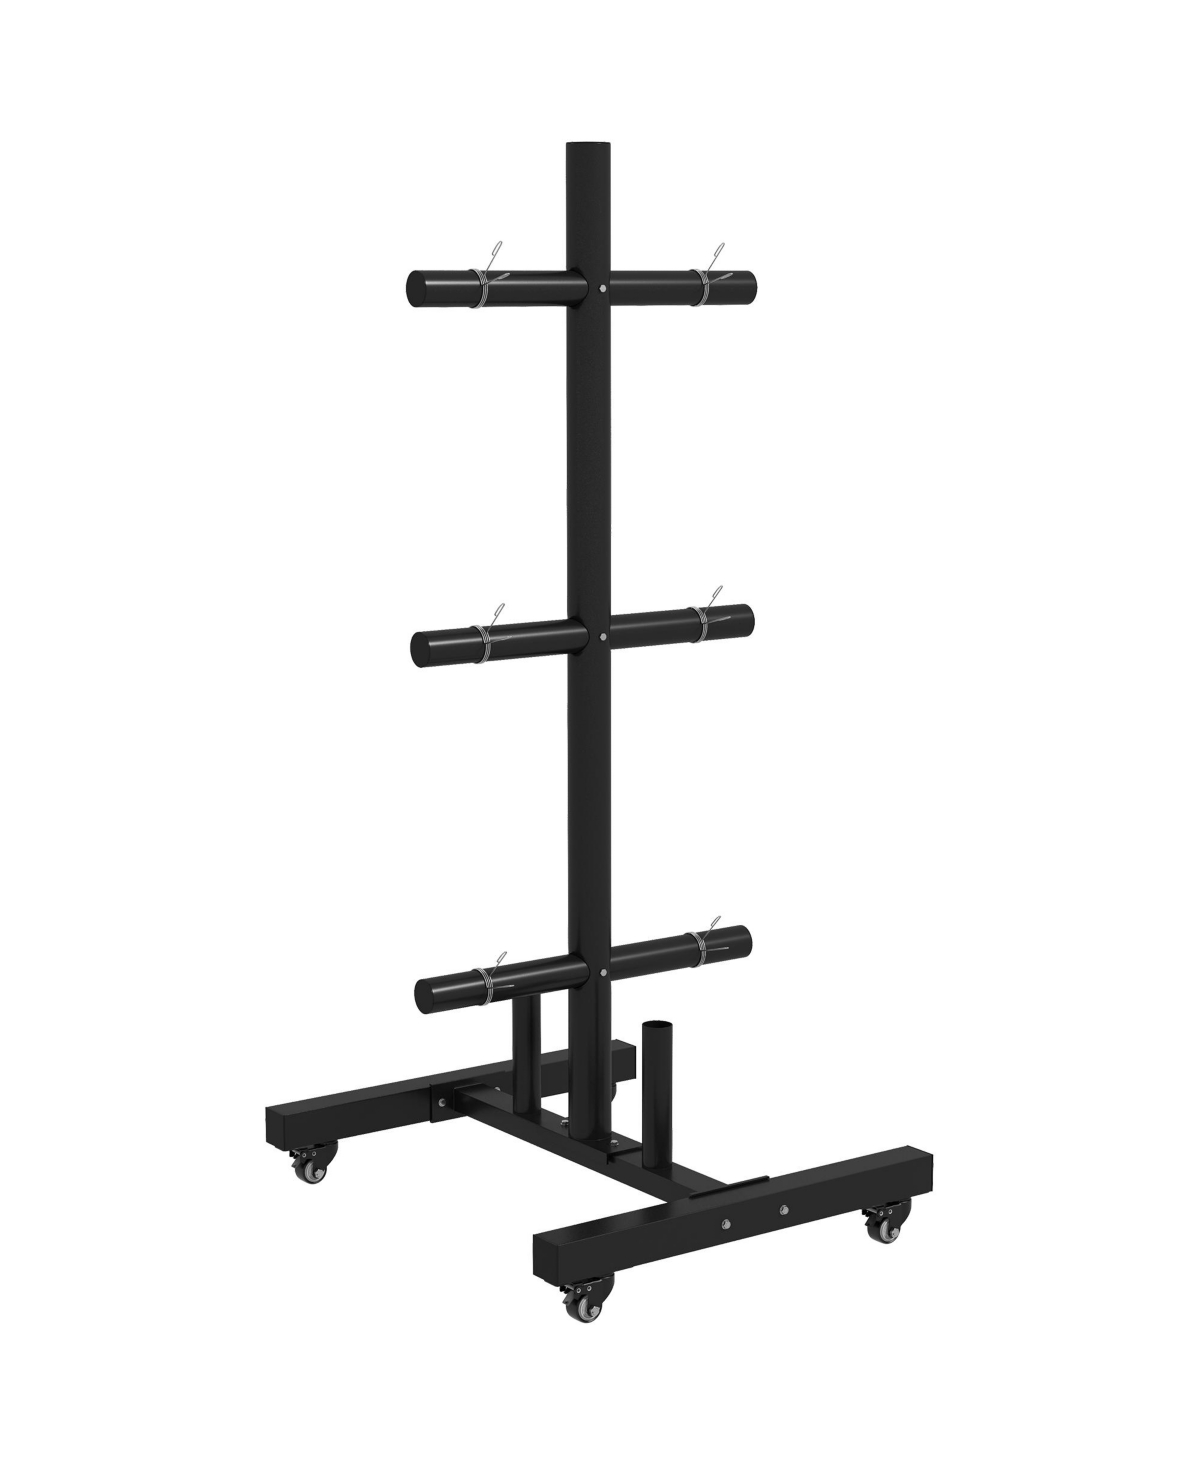 Olympic Weight Plate Rack with 4 Wheels and 6 Fasten Clamps - Black